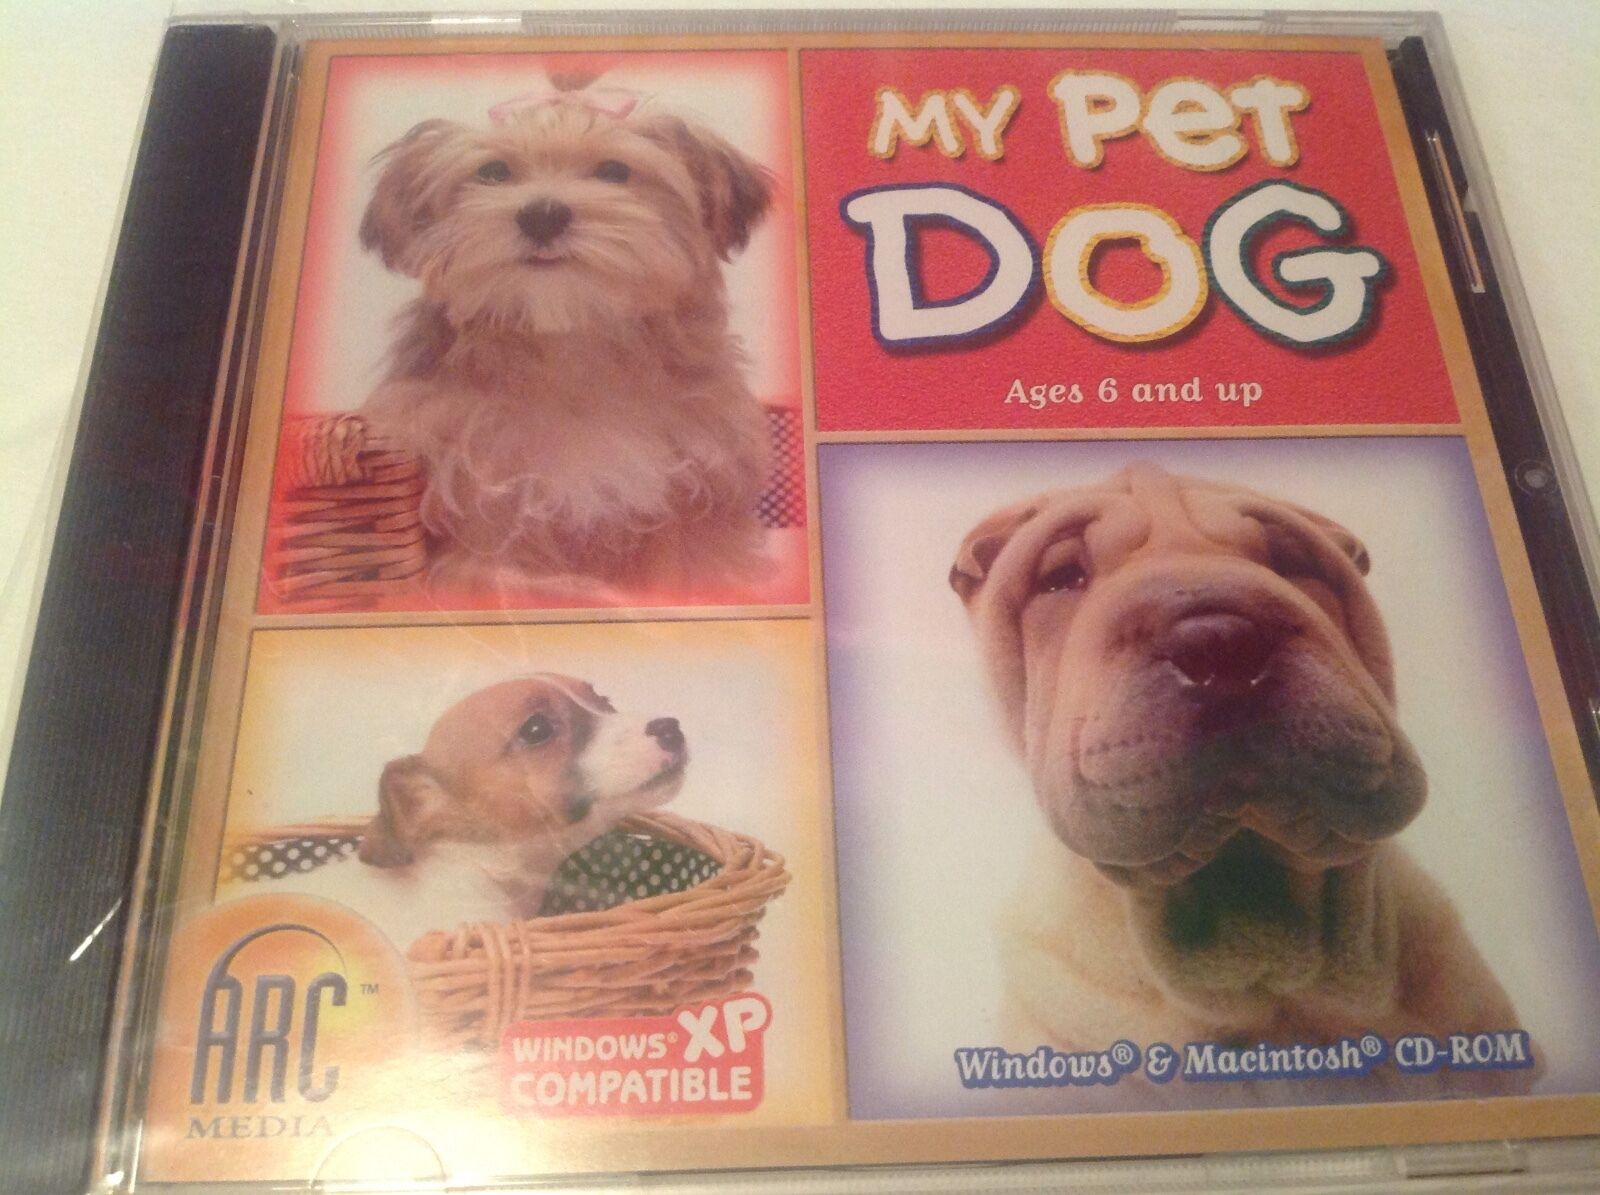 My Pet Dog Ages 6+ CD 2005 for Win/Mac NEW in Jewel Case